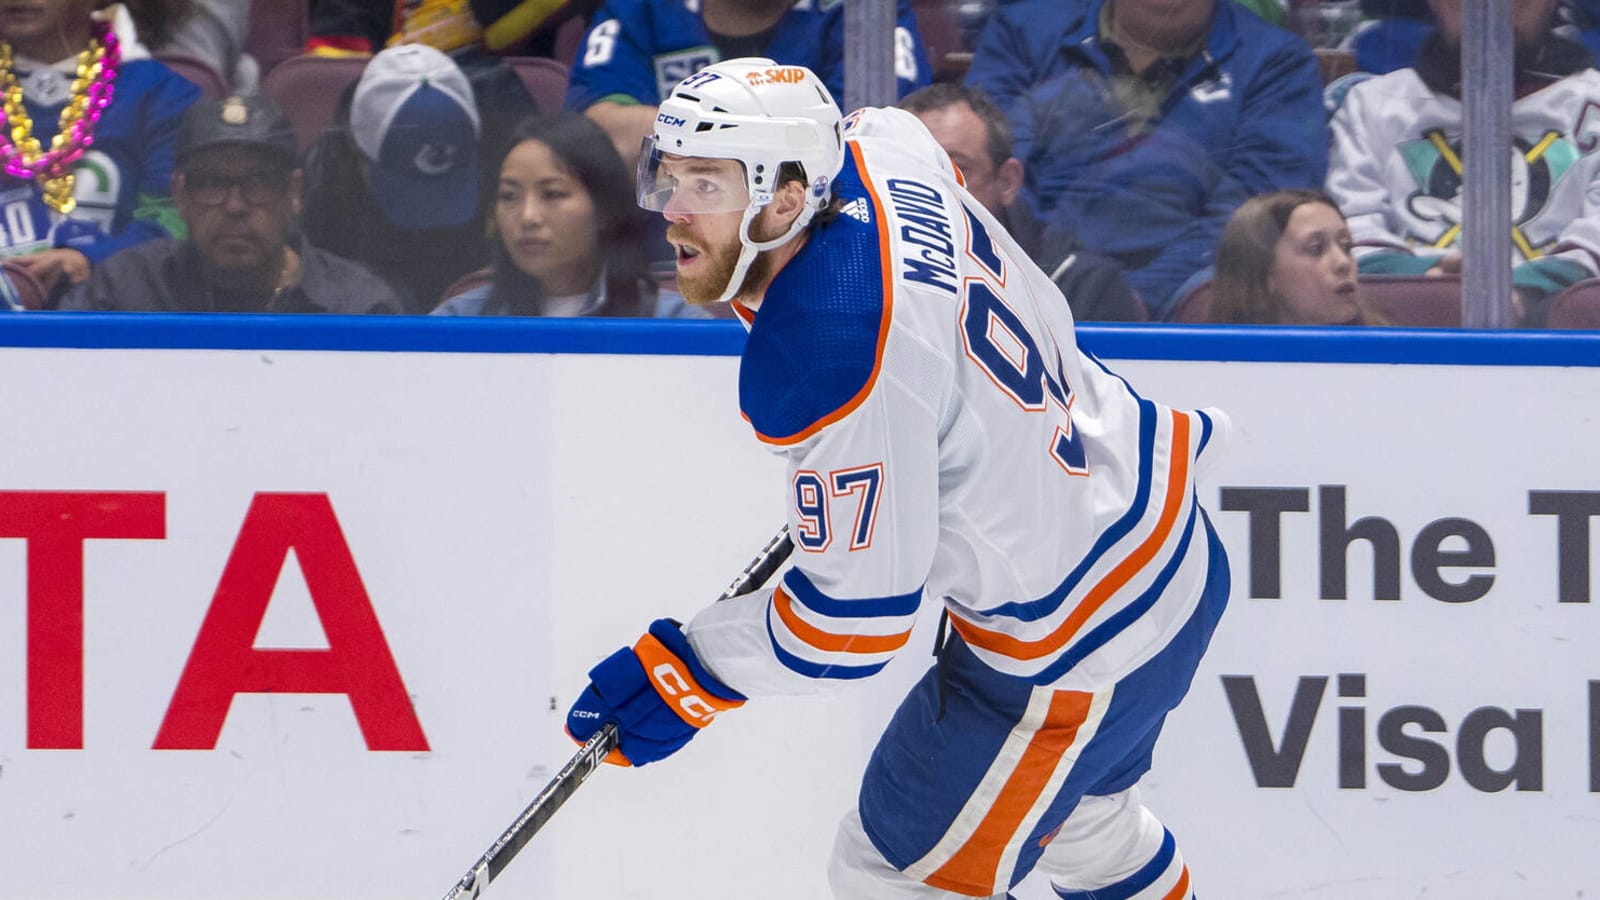 Do Oilers need more from Connor McDavid?